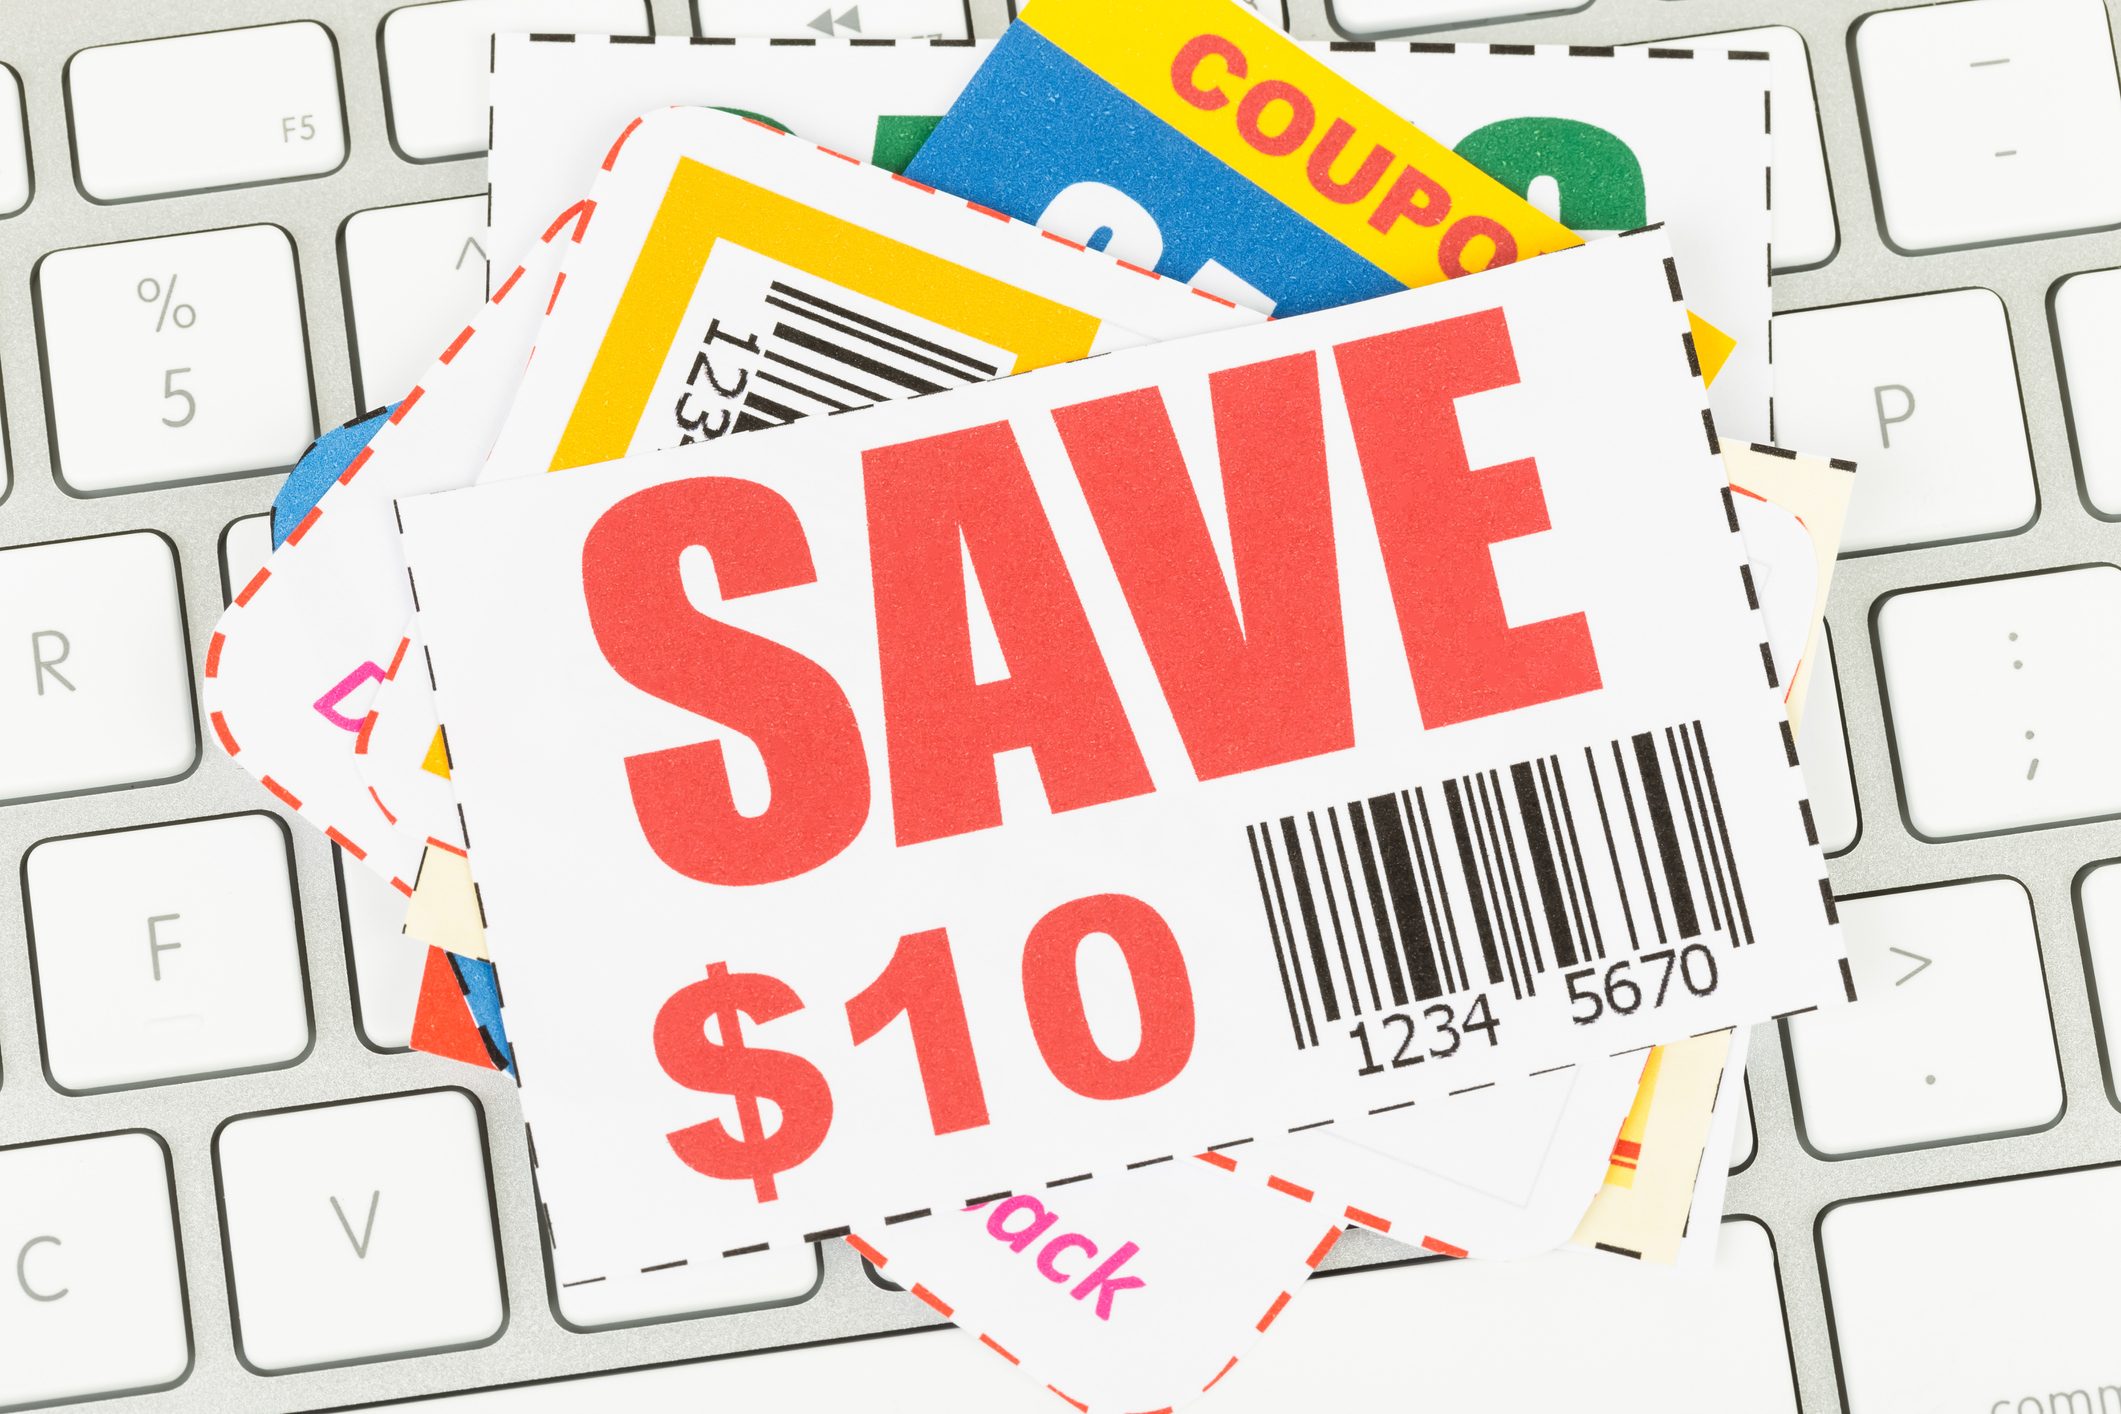 Saving discount coupon voucher on keyboard, coupons are mock-up